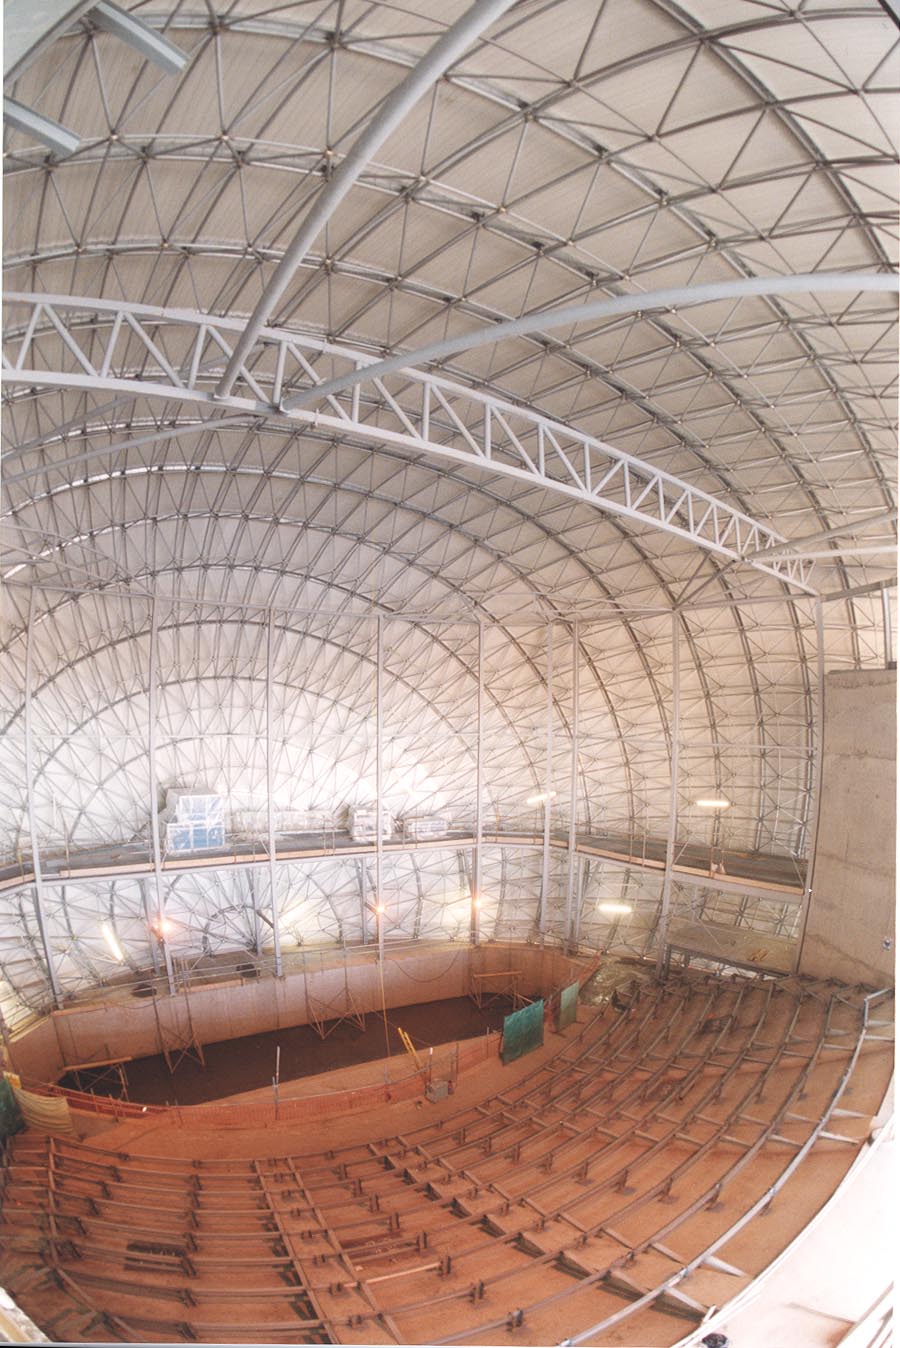 A photograph from 2000 shows the geodesic dome frame and internal space of the IMAX building being constructed.